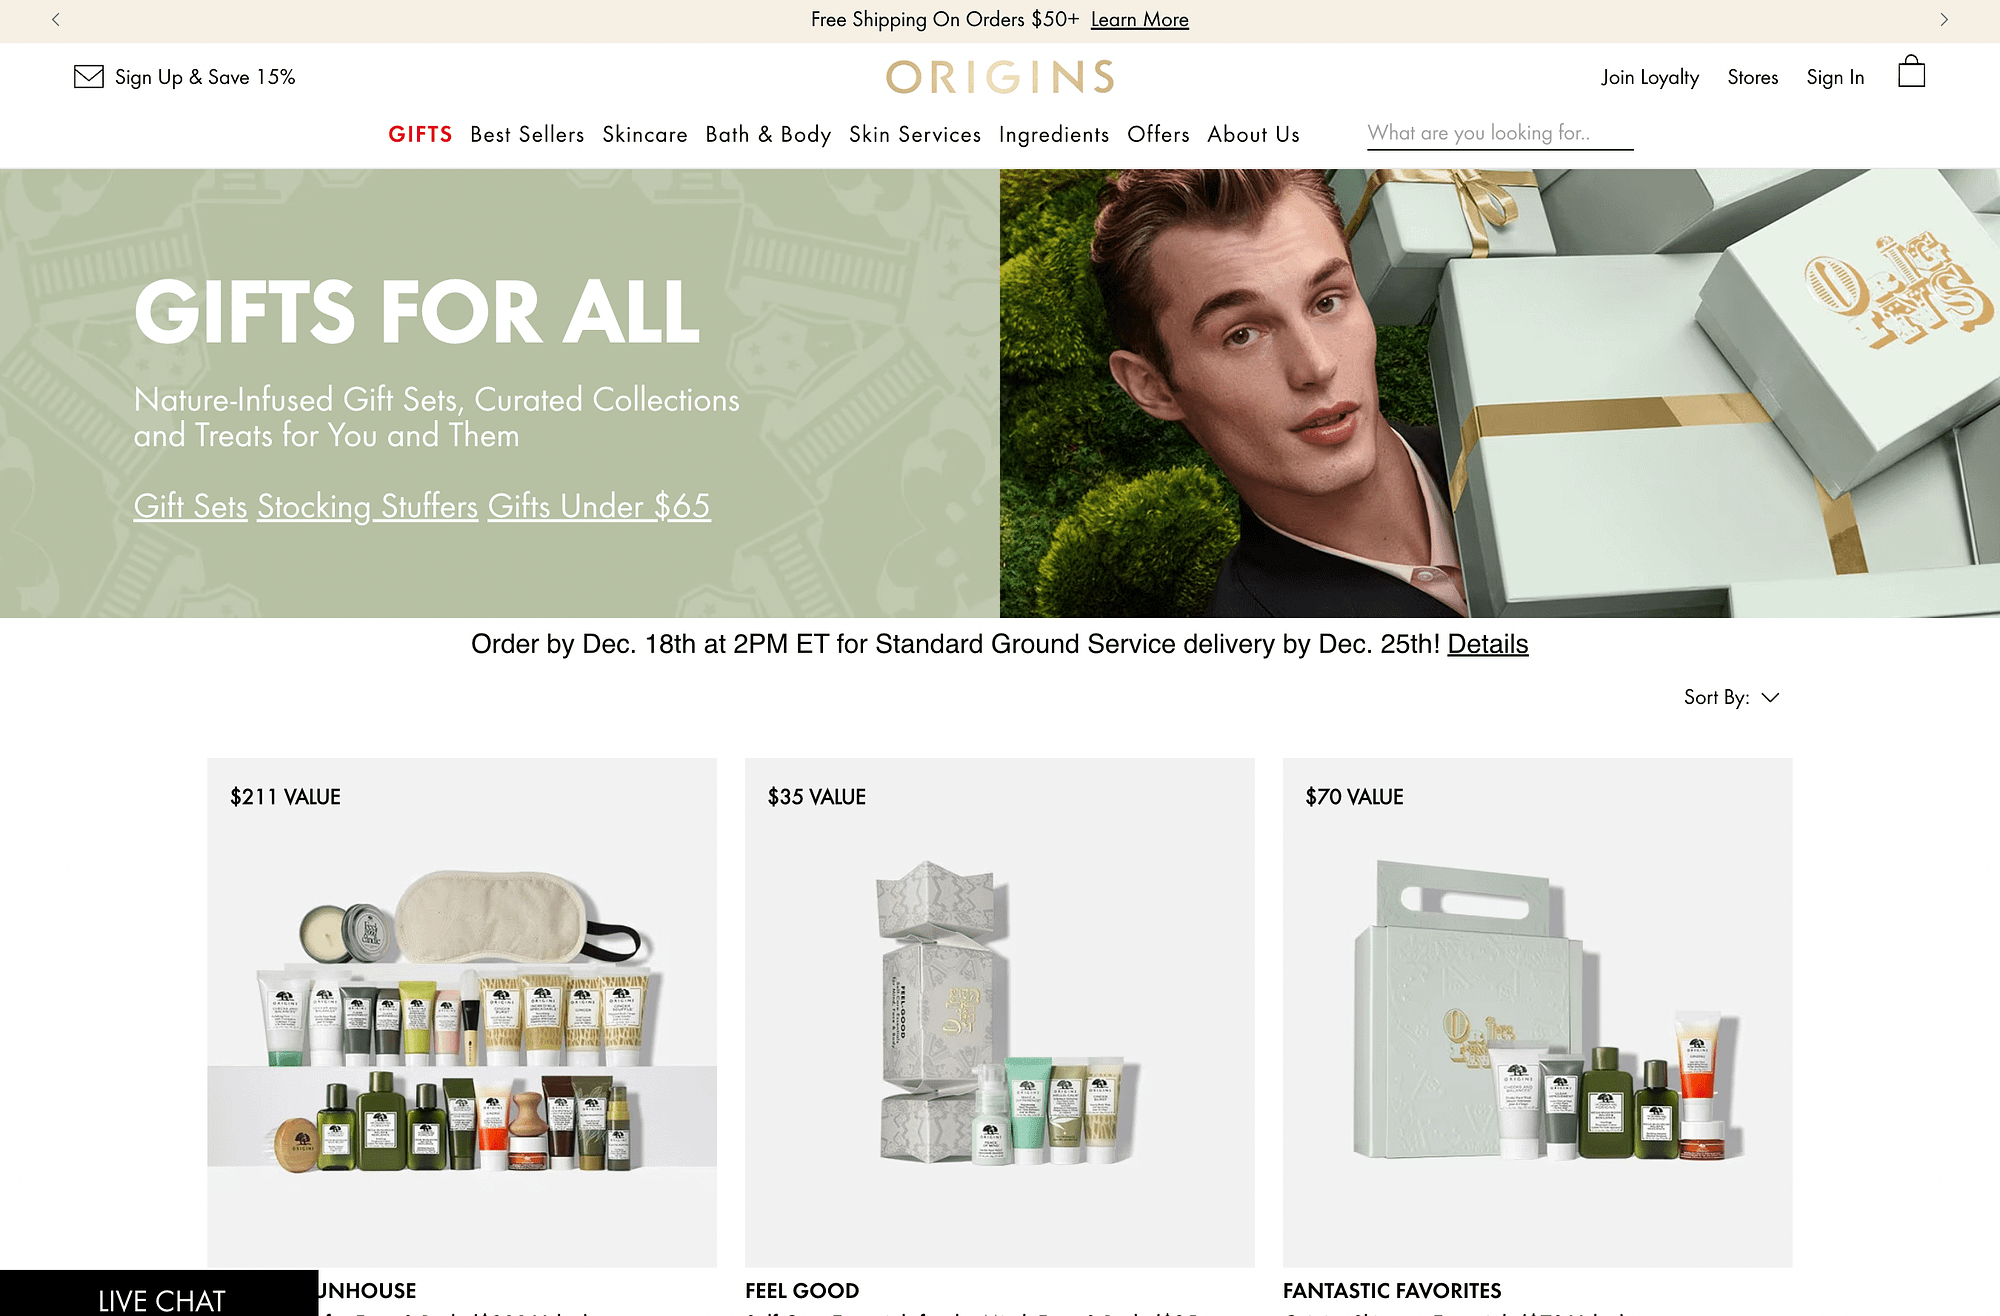 Gift sets in an online store - another one of effective Christmas promotion ideas.